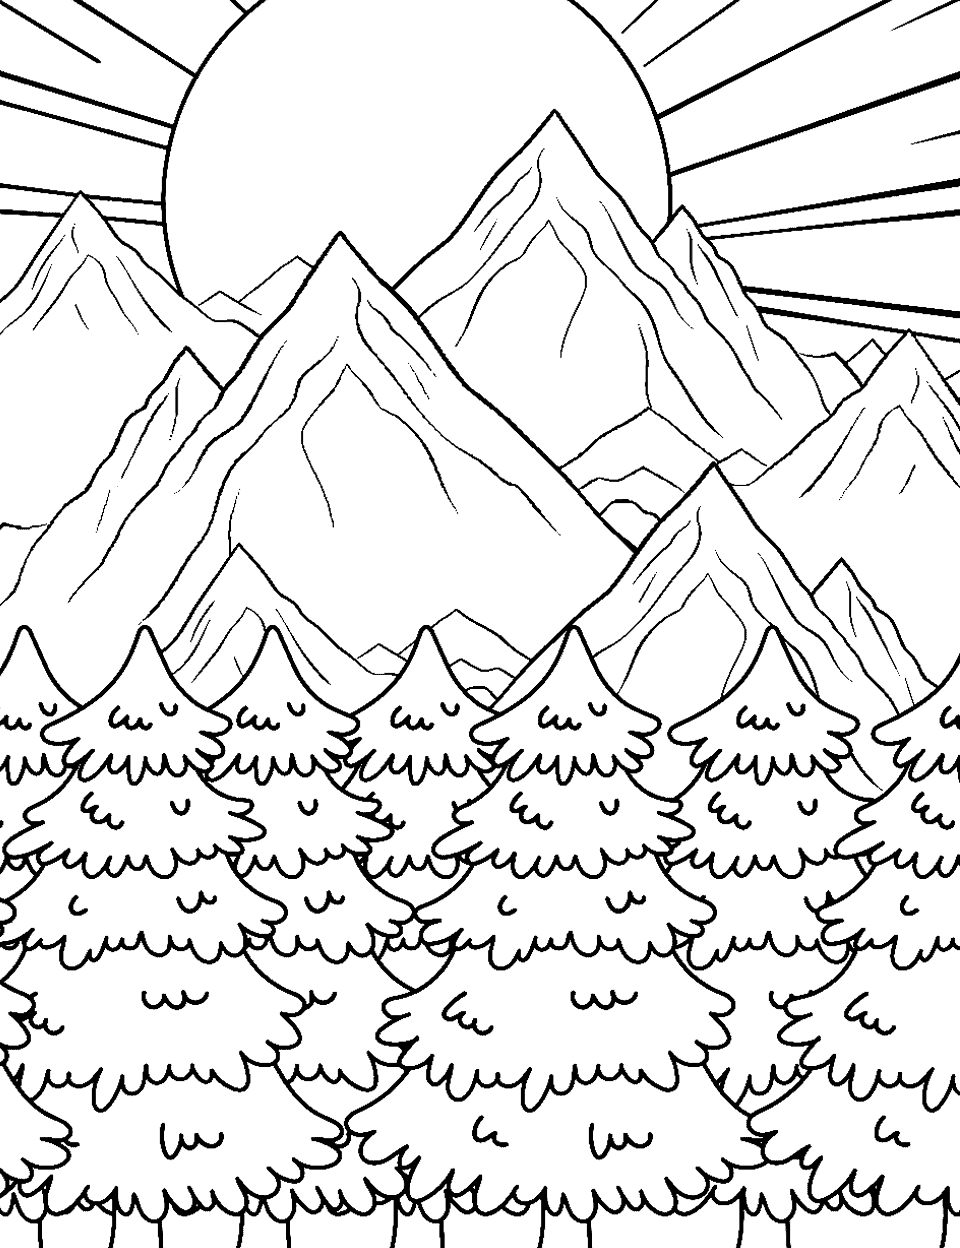 Mountain Magic Coloring Page - A mountain landscape with a sun in the sky.